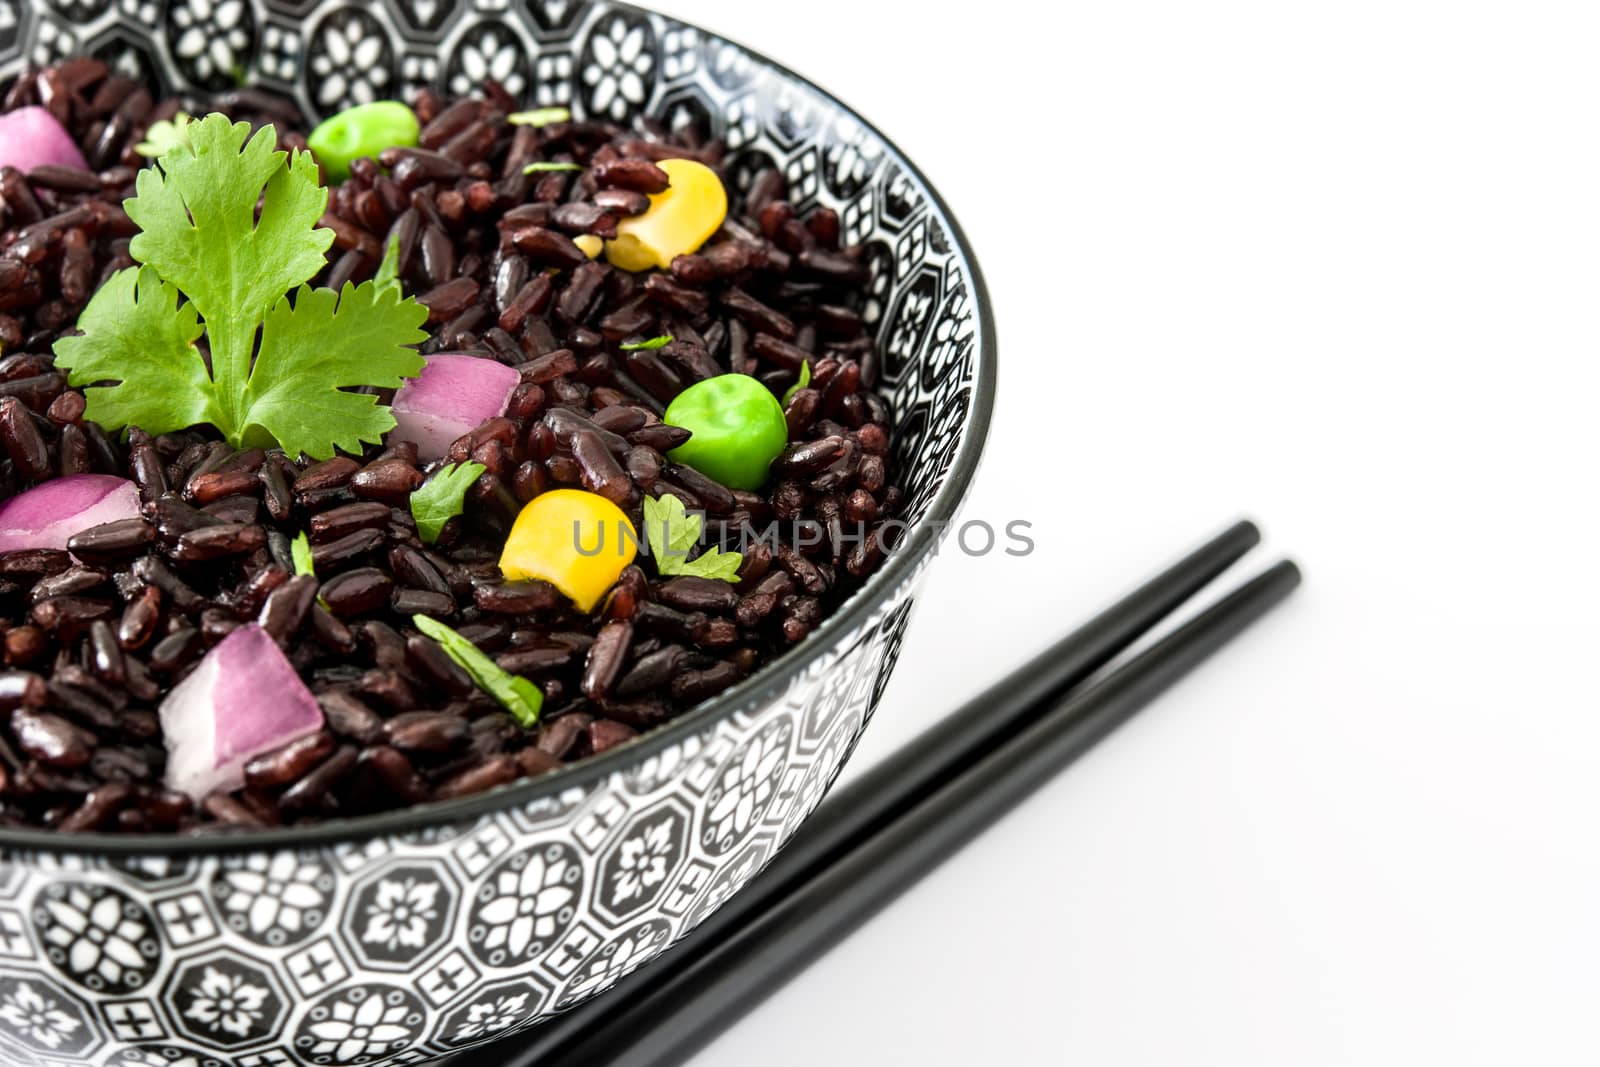 Black rice and vegetables isolated on white background by chandlervid85